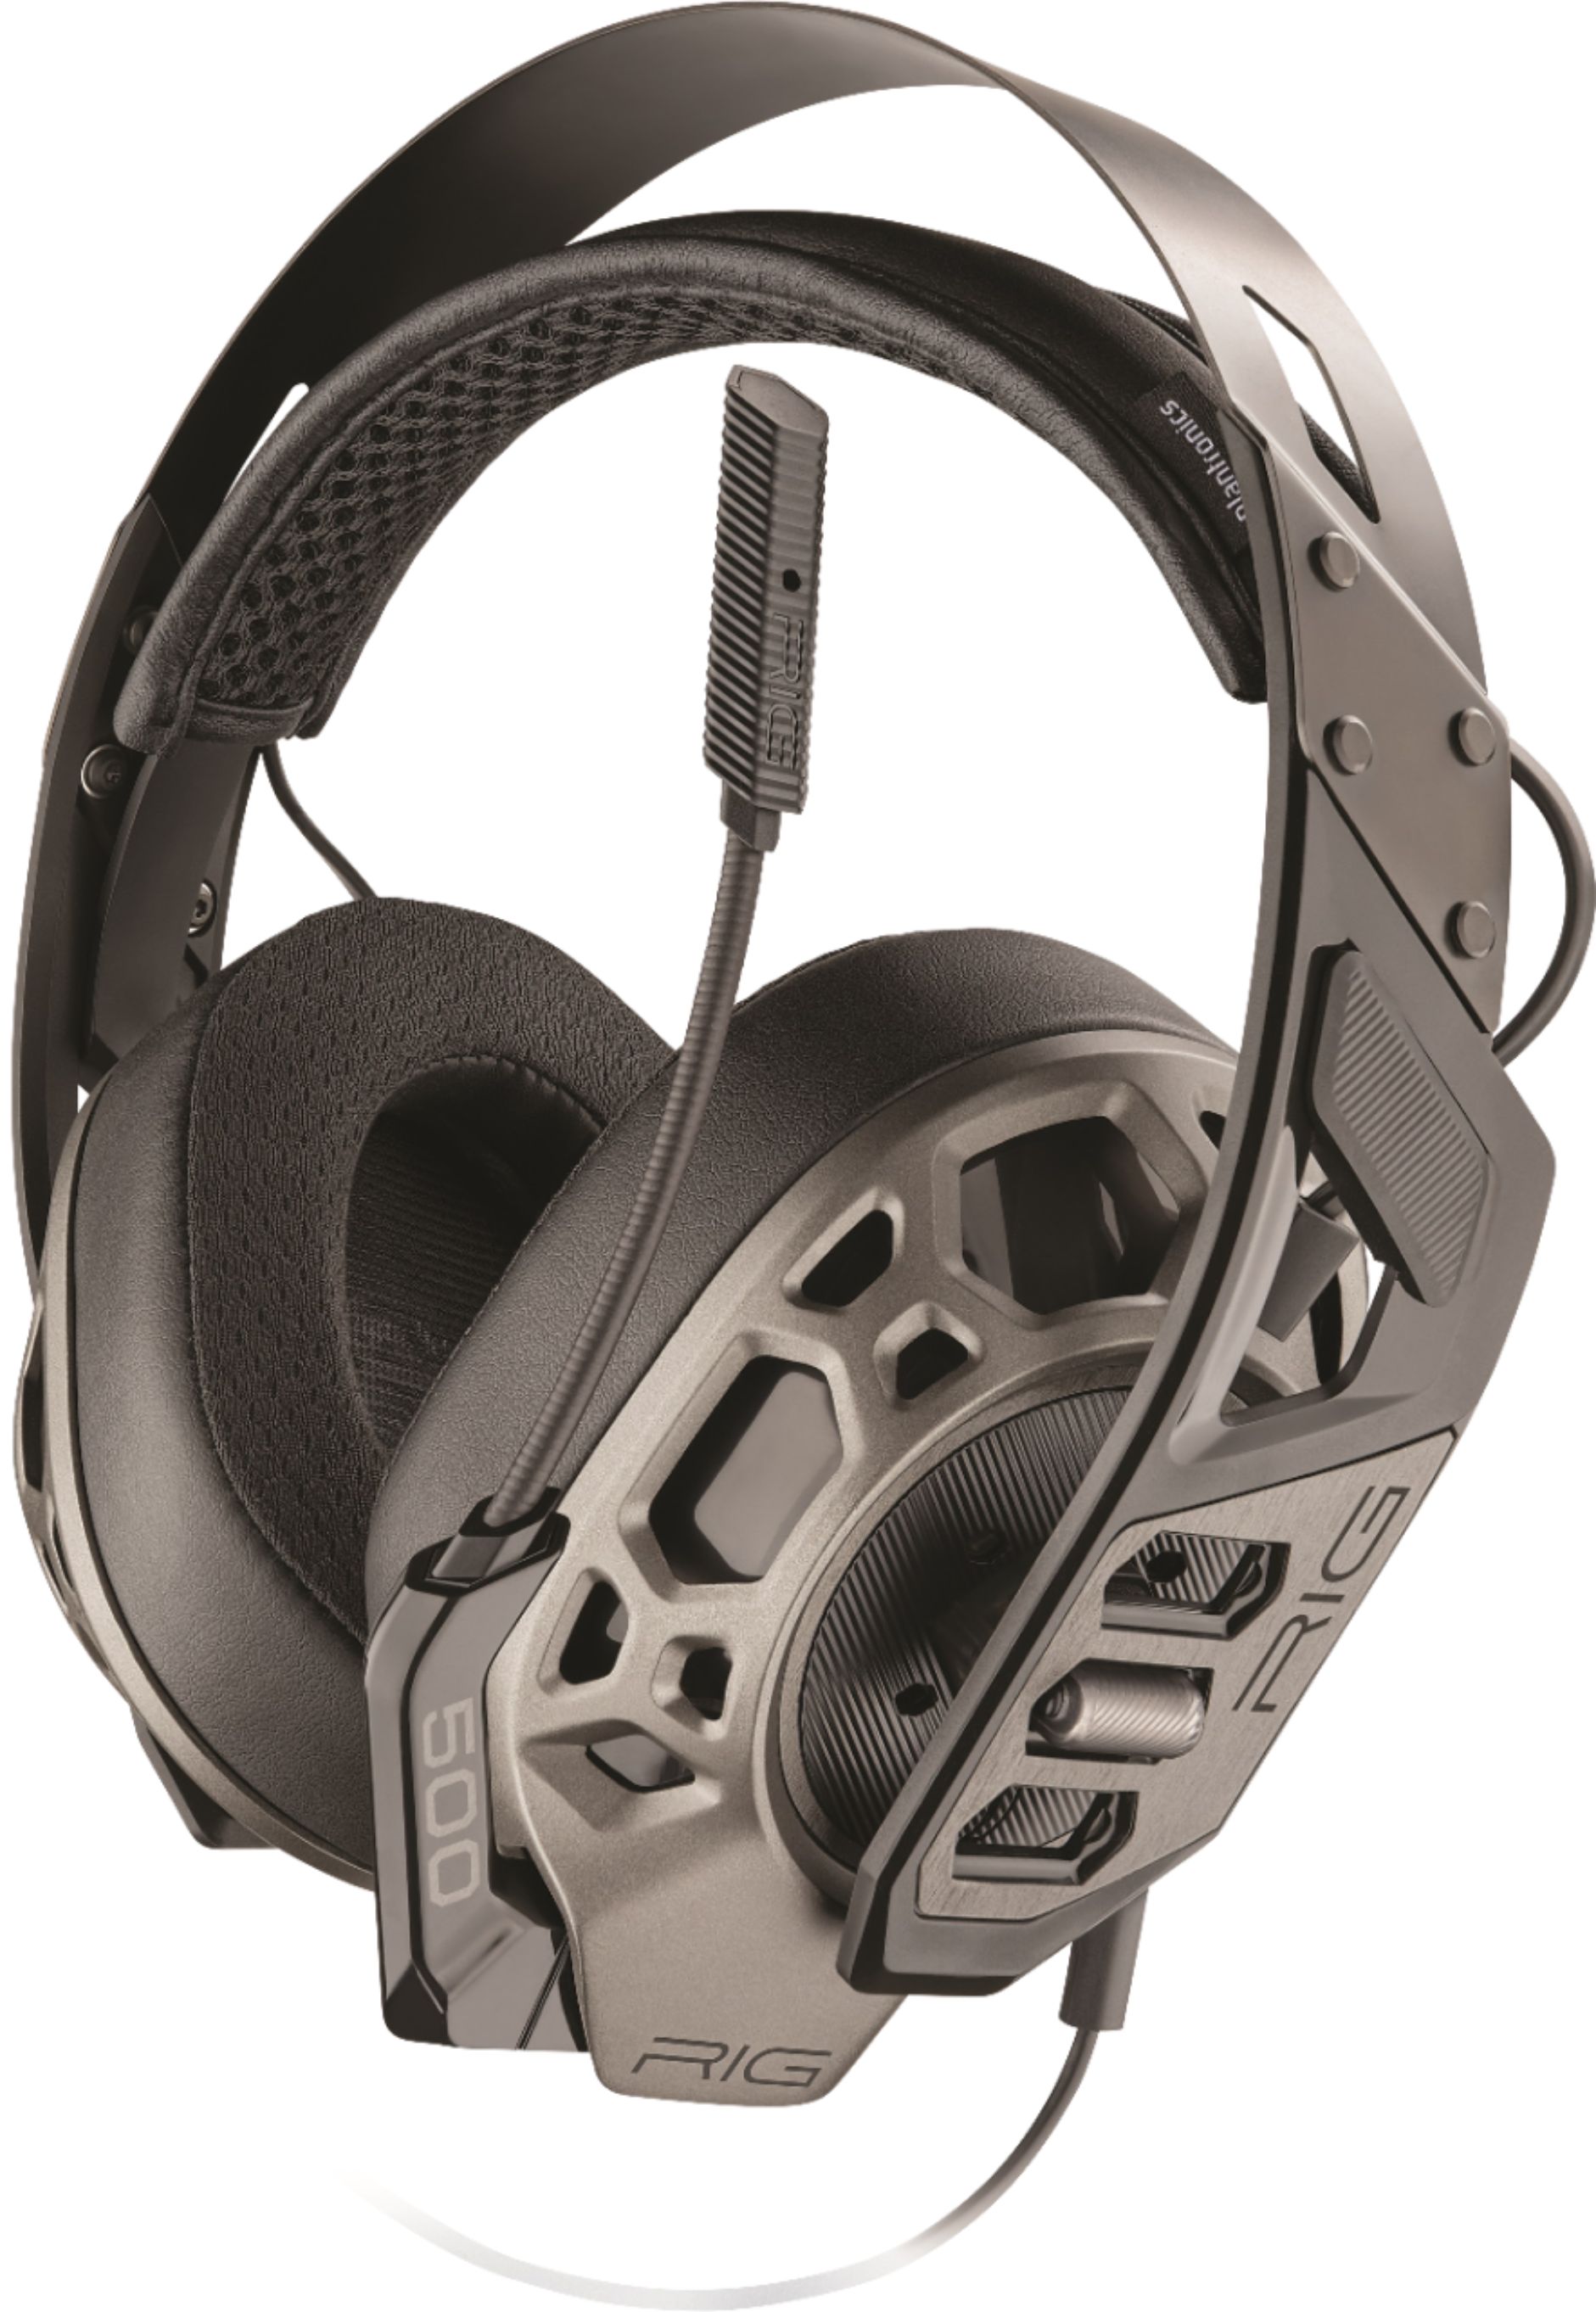 dolby atmos headphones ps4